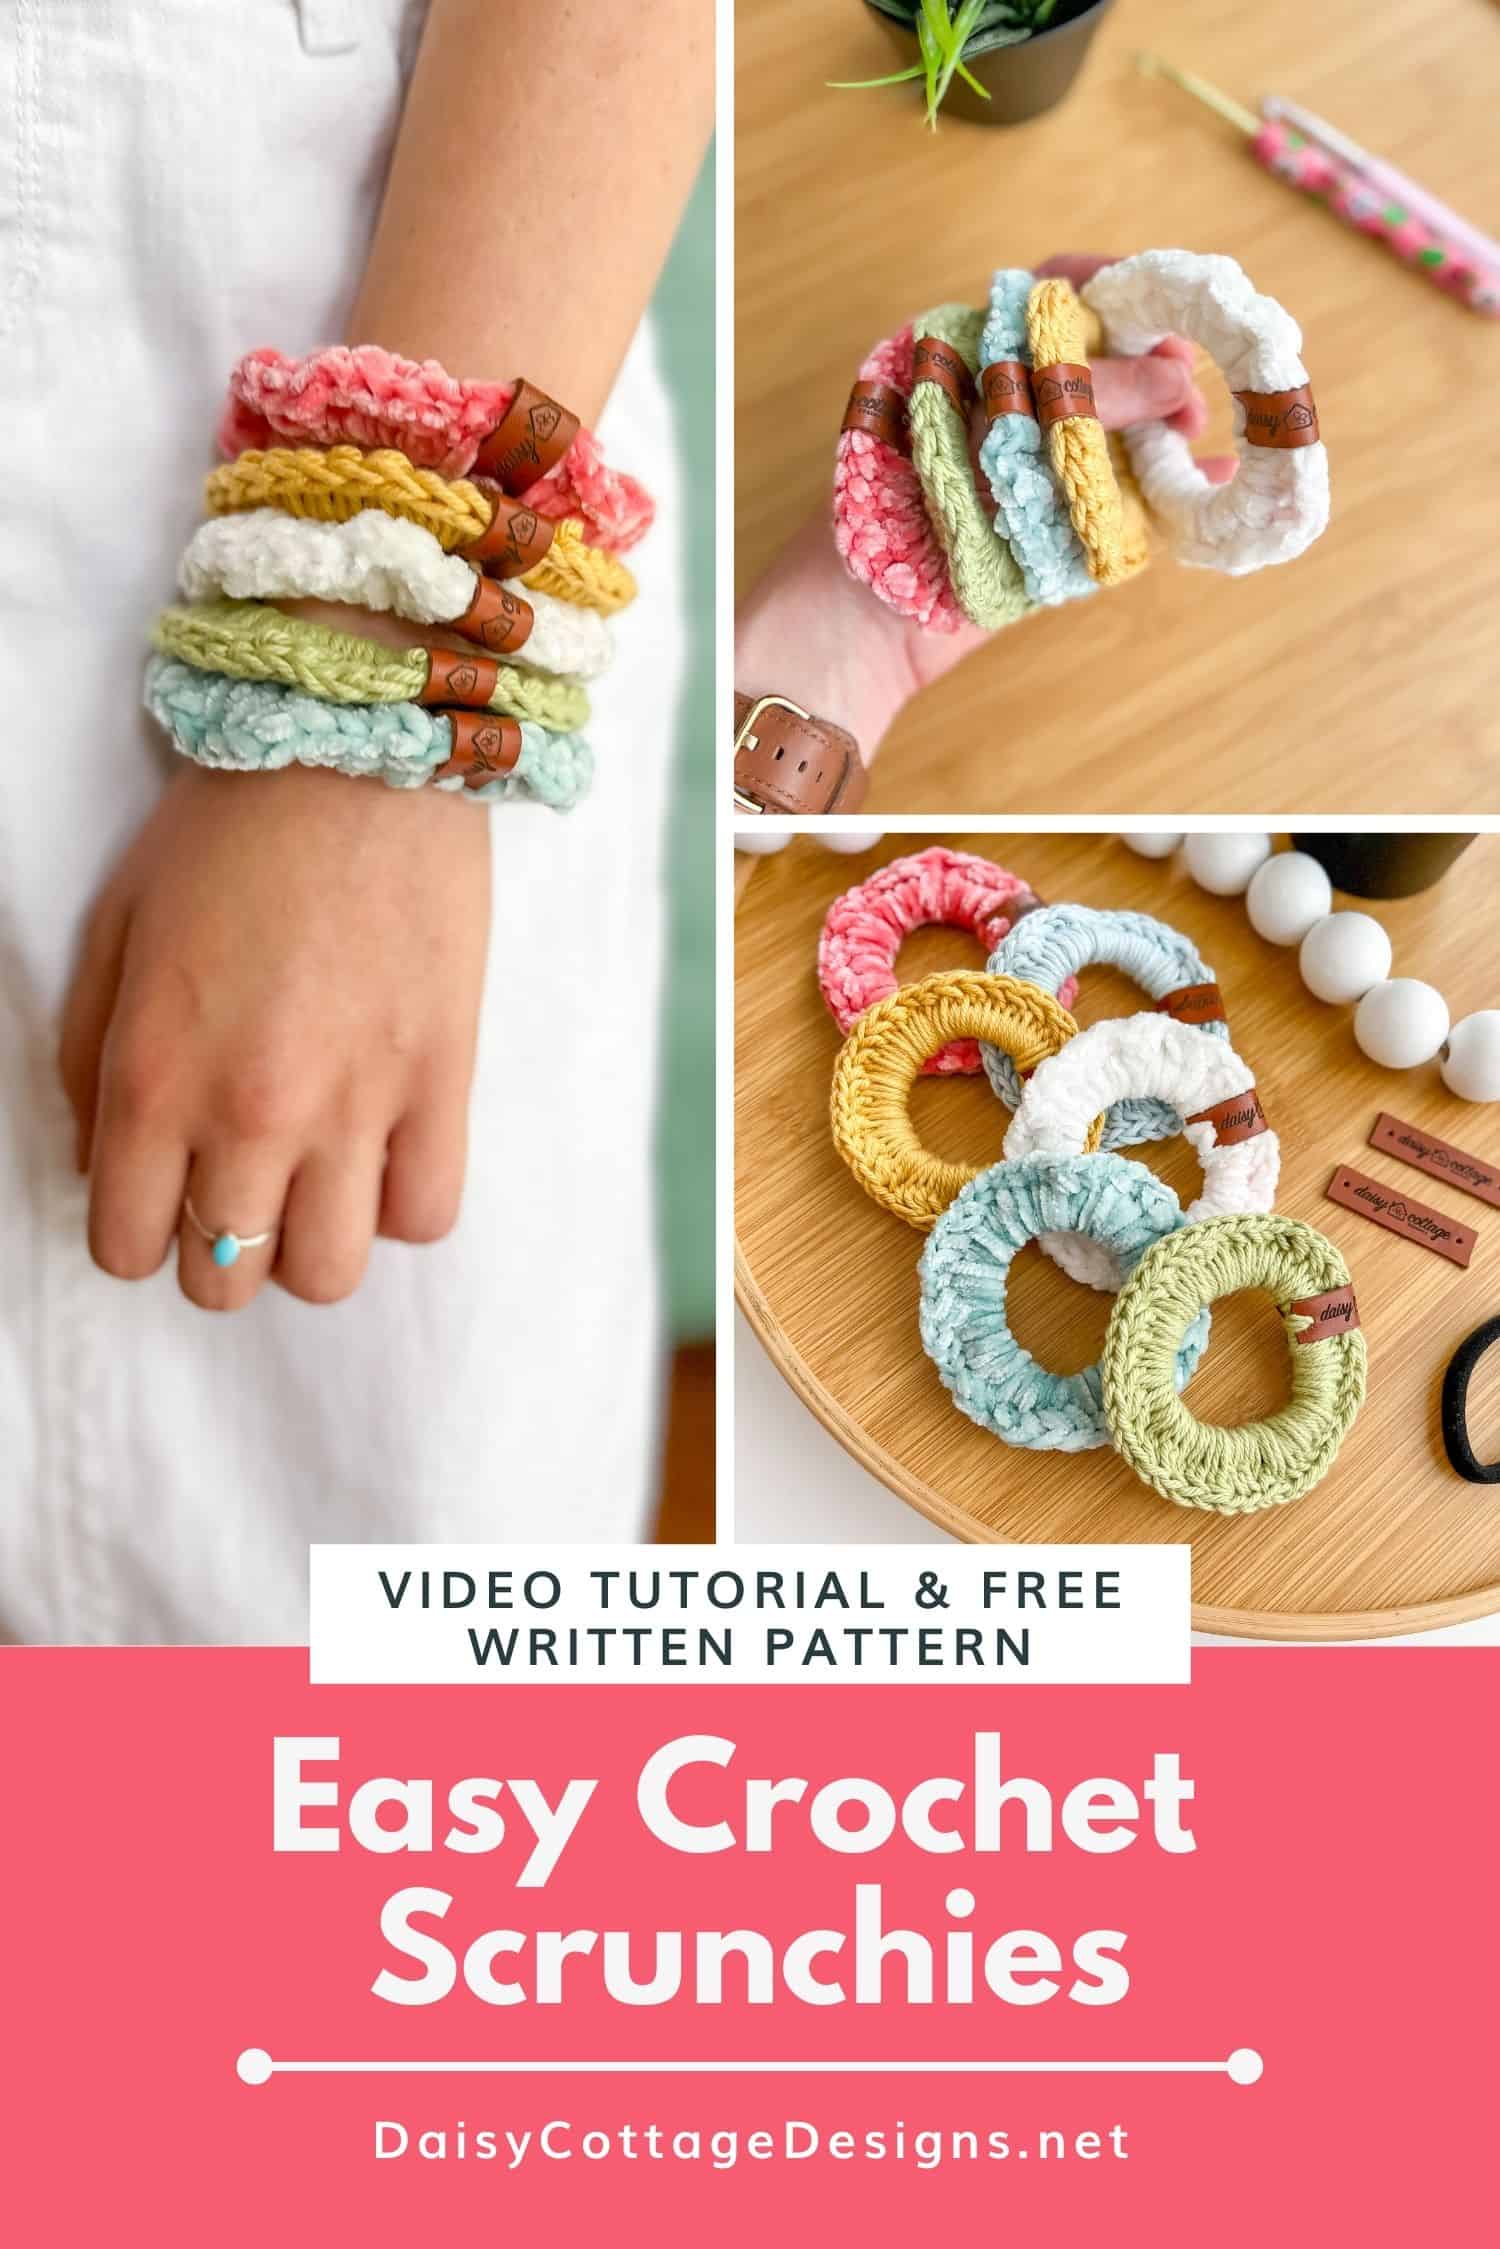 Crochet scrunchies are a fun way to dress up a ponytail or messy bun. Learn how to crochet your own scrunchies with this free crochet pattern - there's a video tutorial, too! 